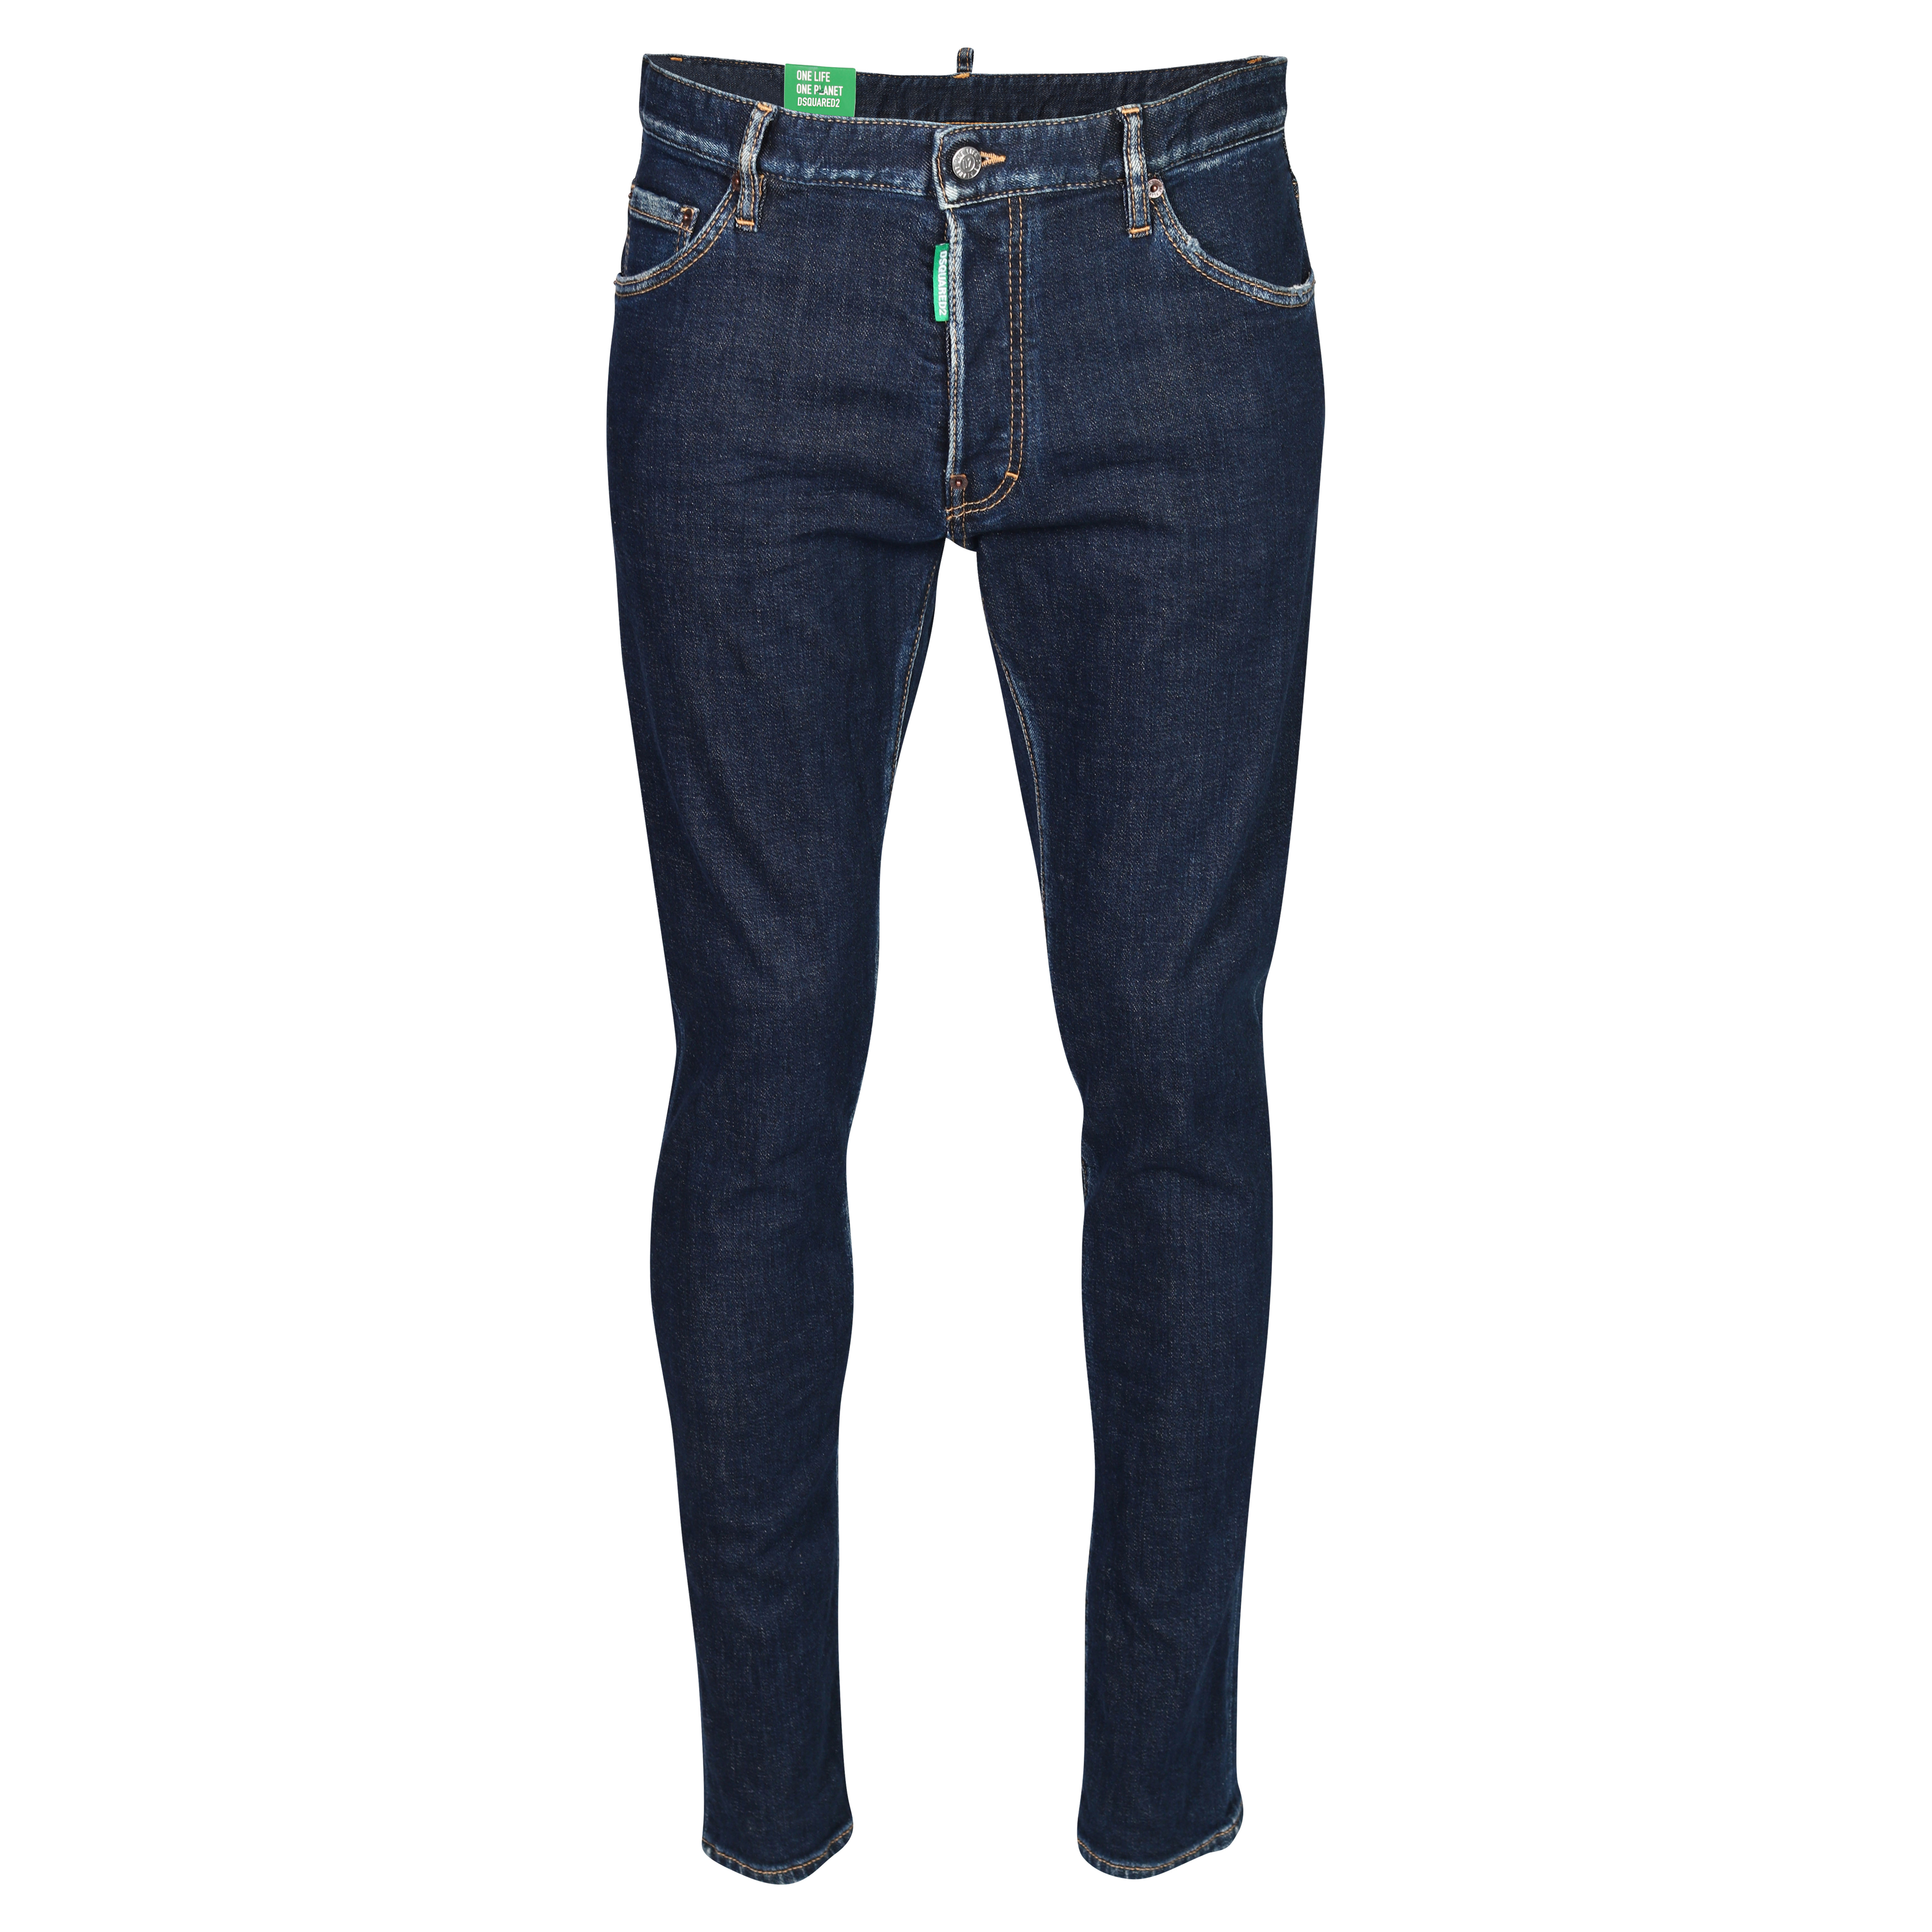 DSQUARED2 Green Label Cool Guy Jeans in Dark Blue